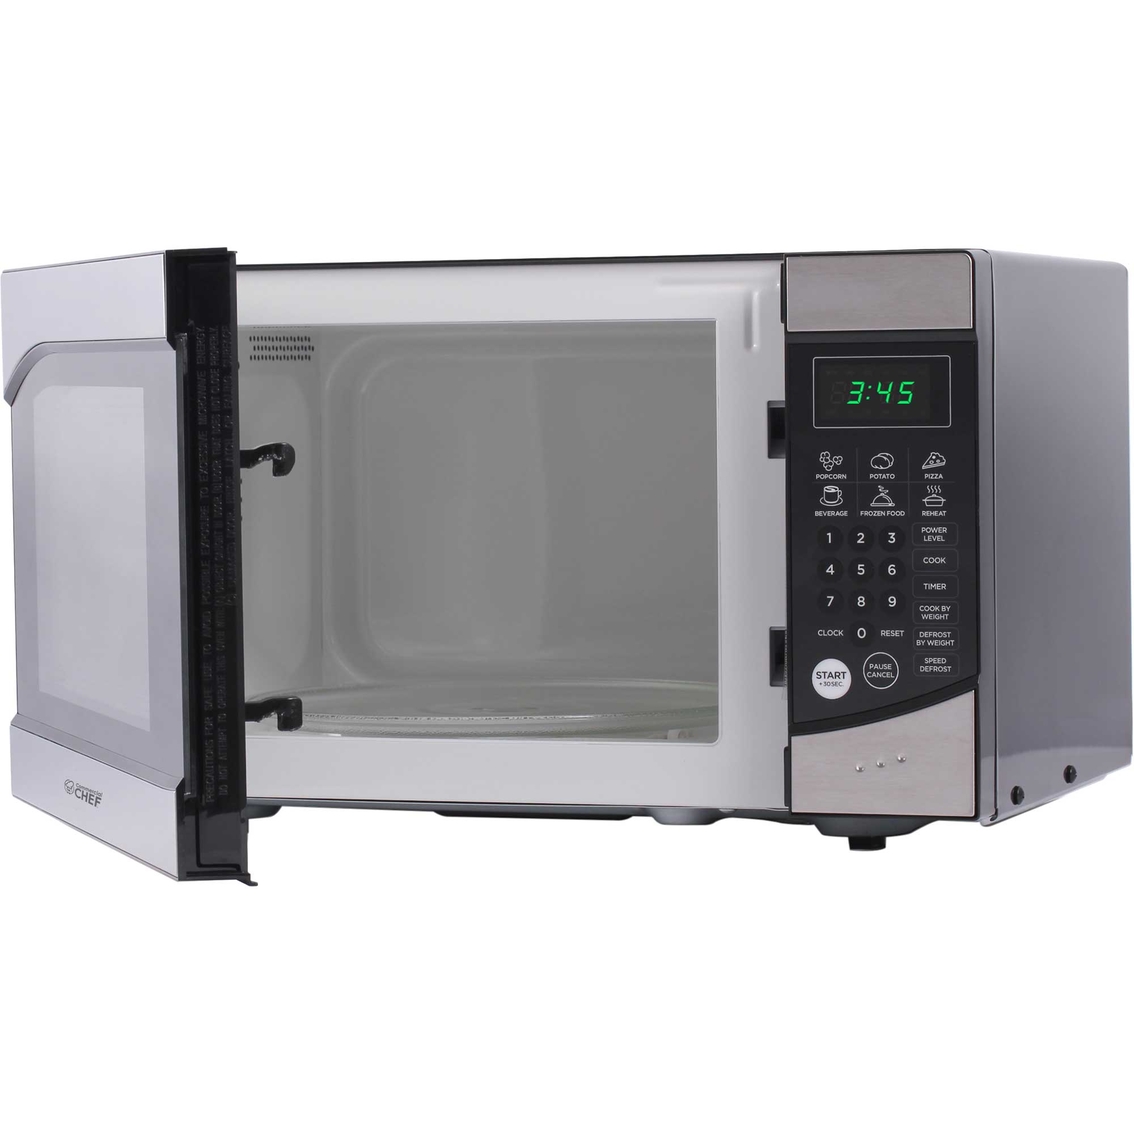 Commercial Chef .9 cu. ft. Counter Top Microwave - Image 3 of 8